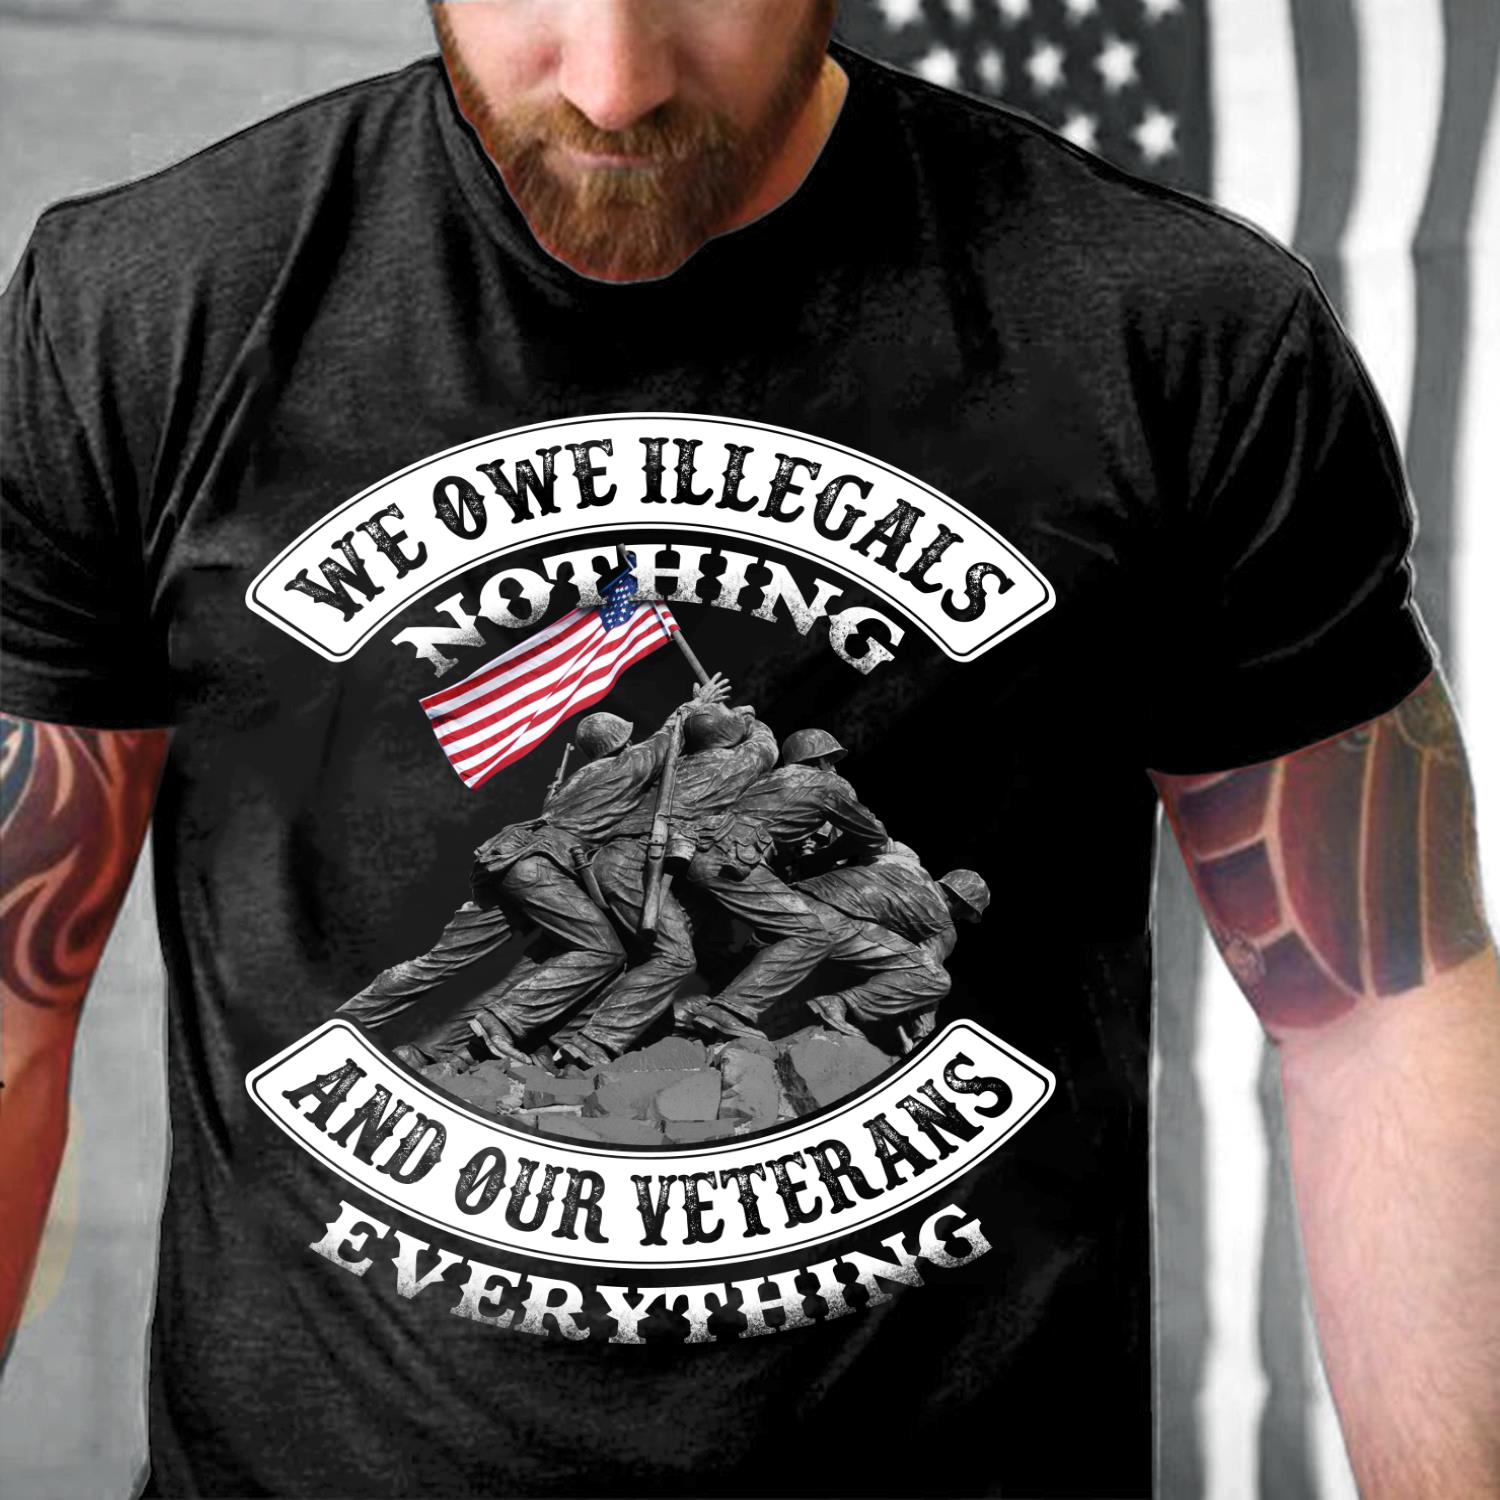 Veterans Shirt - We Owe Illegals Nothing And Our Veterans ATM-USBL22 T-Shirt